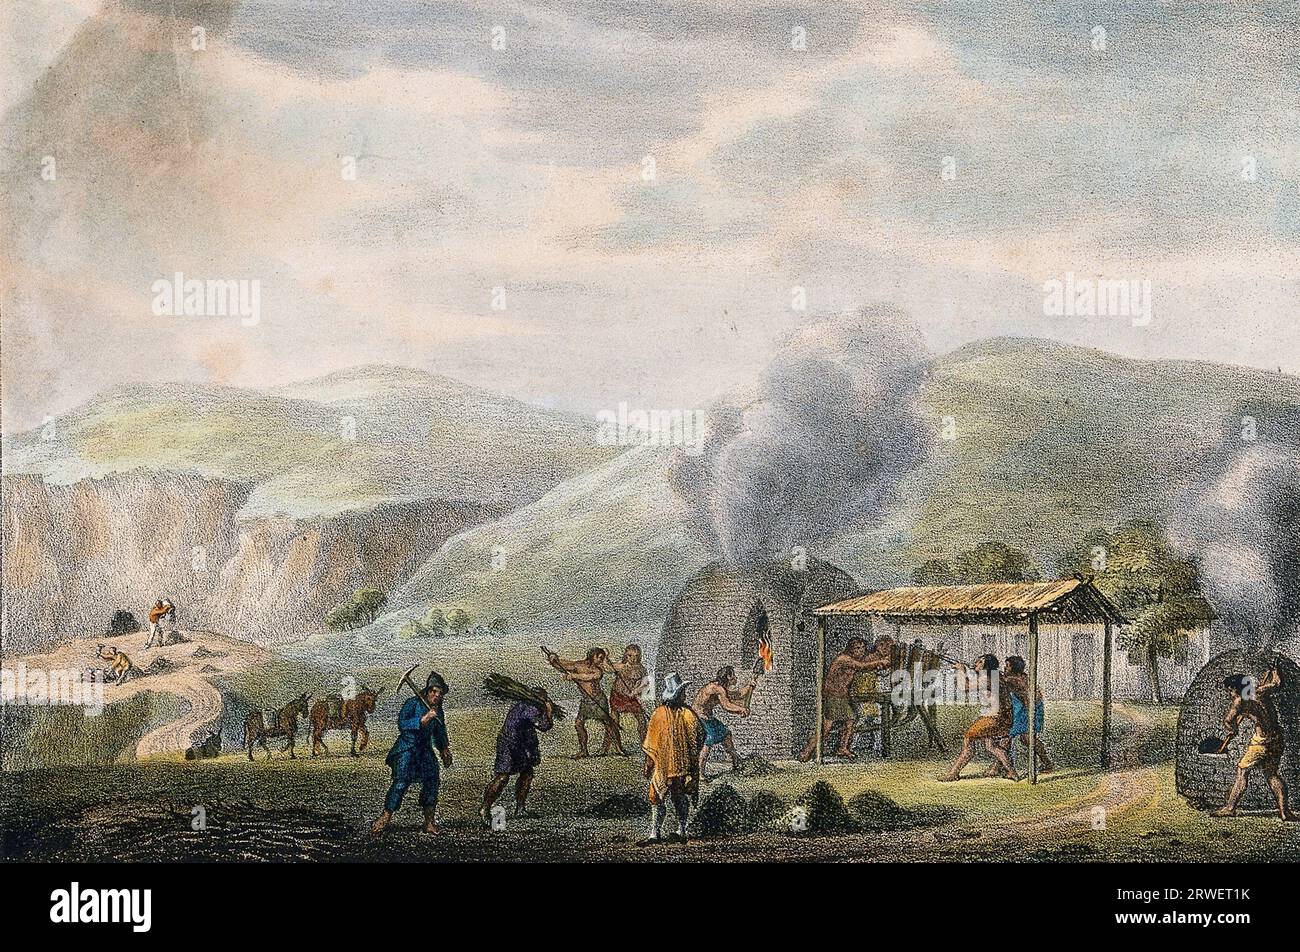 The processing of copper, copper mine, copper smelter, around 1800, England, Historical, digitally restored reproduction of an original of the time Stock Photo